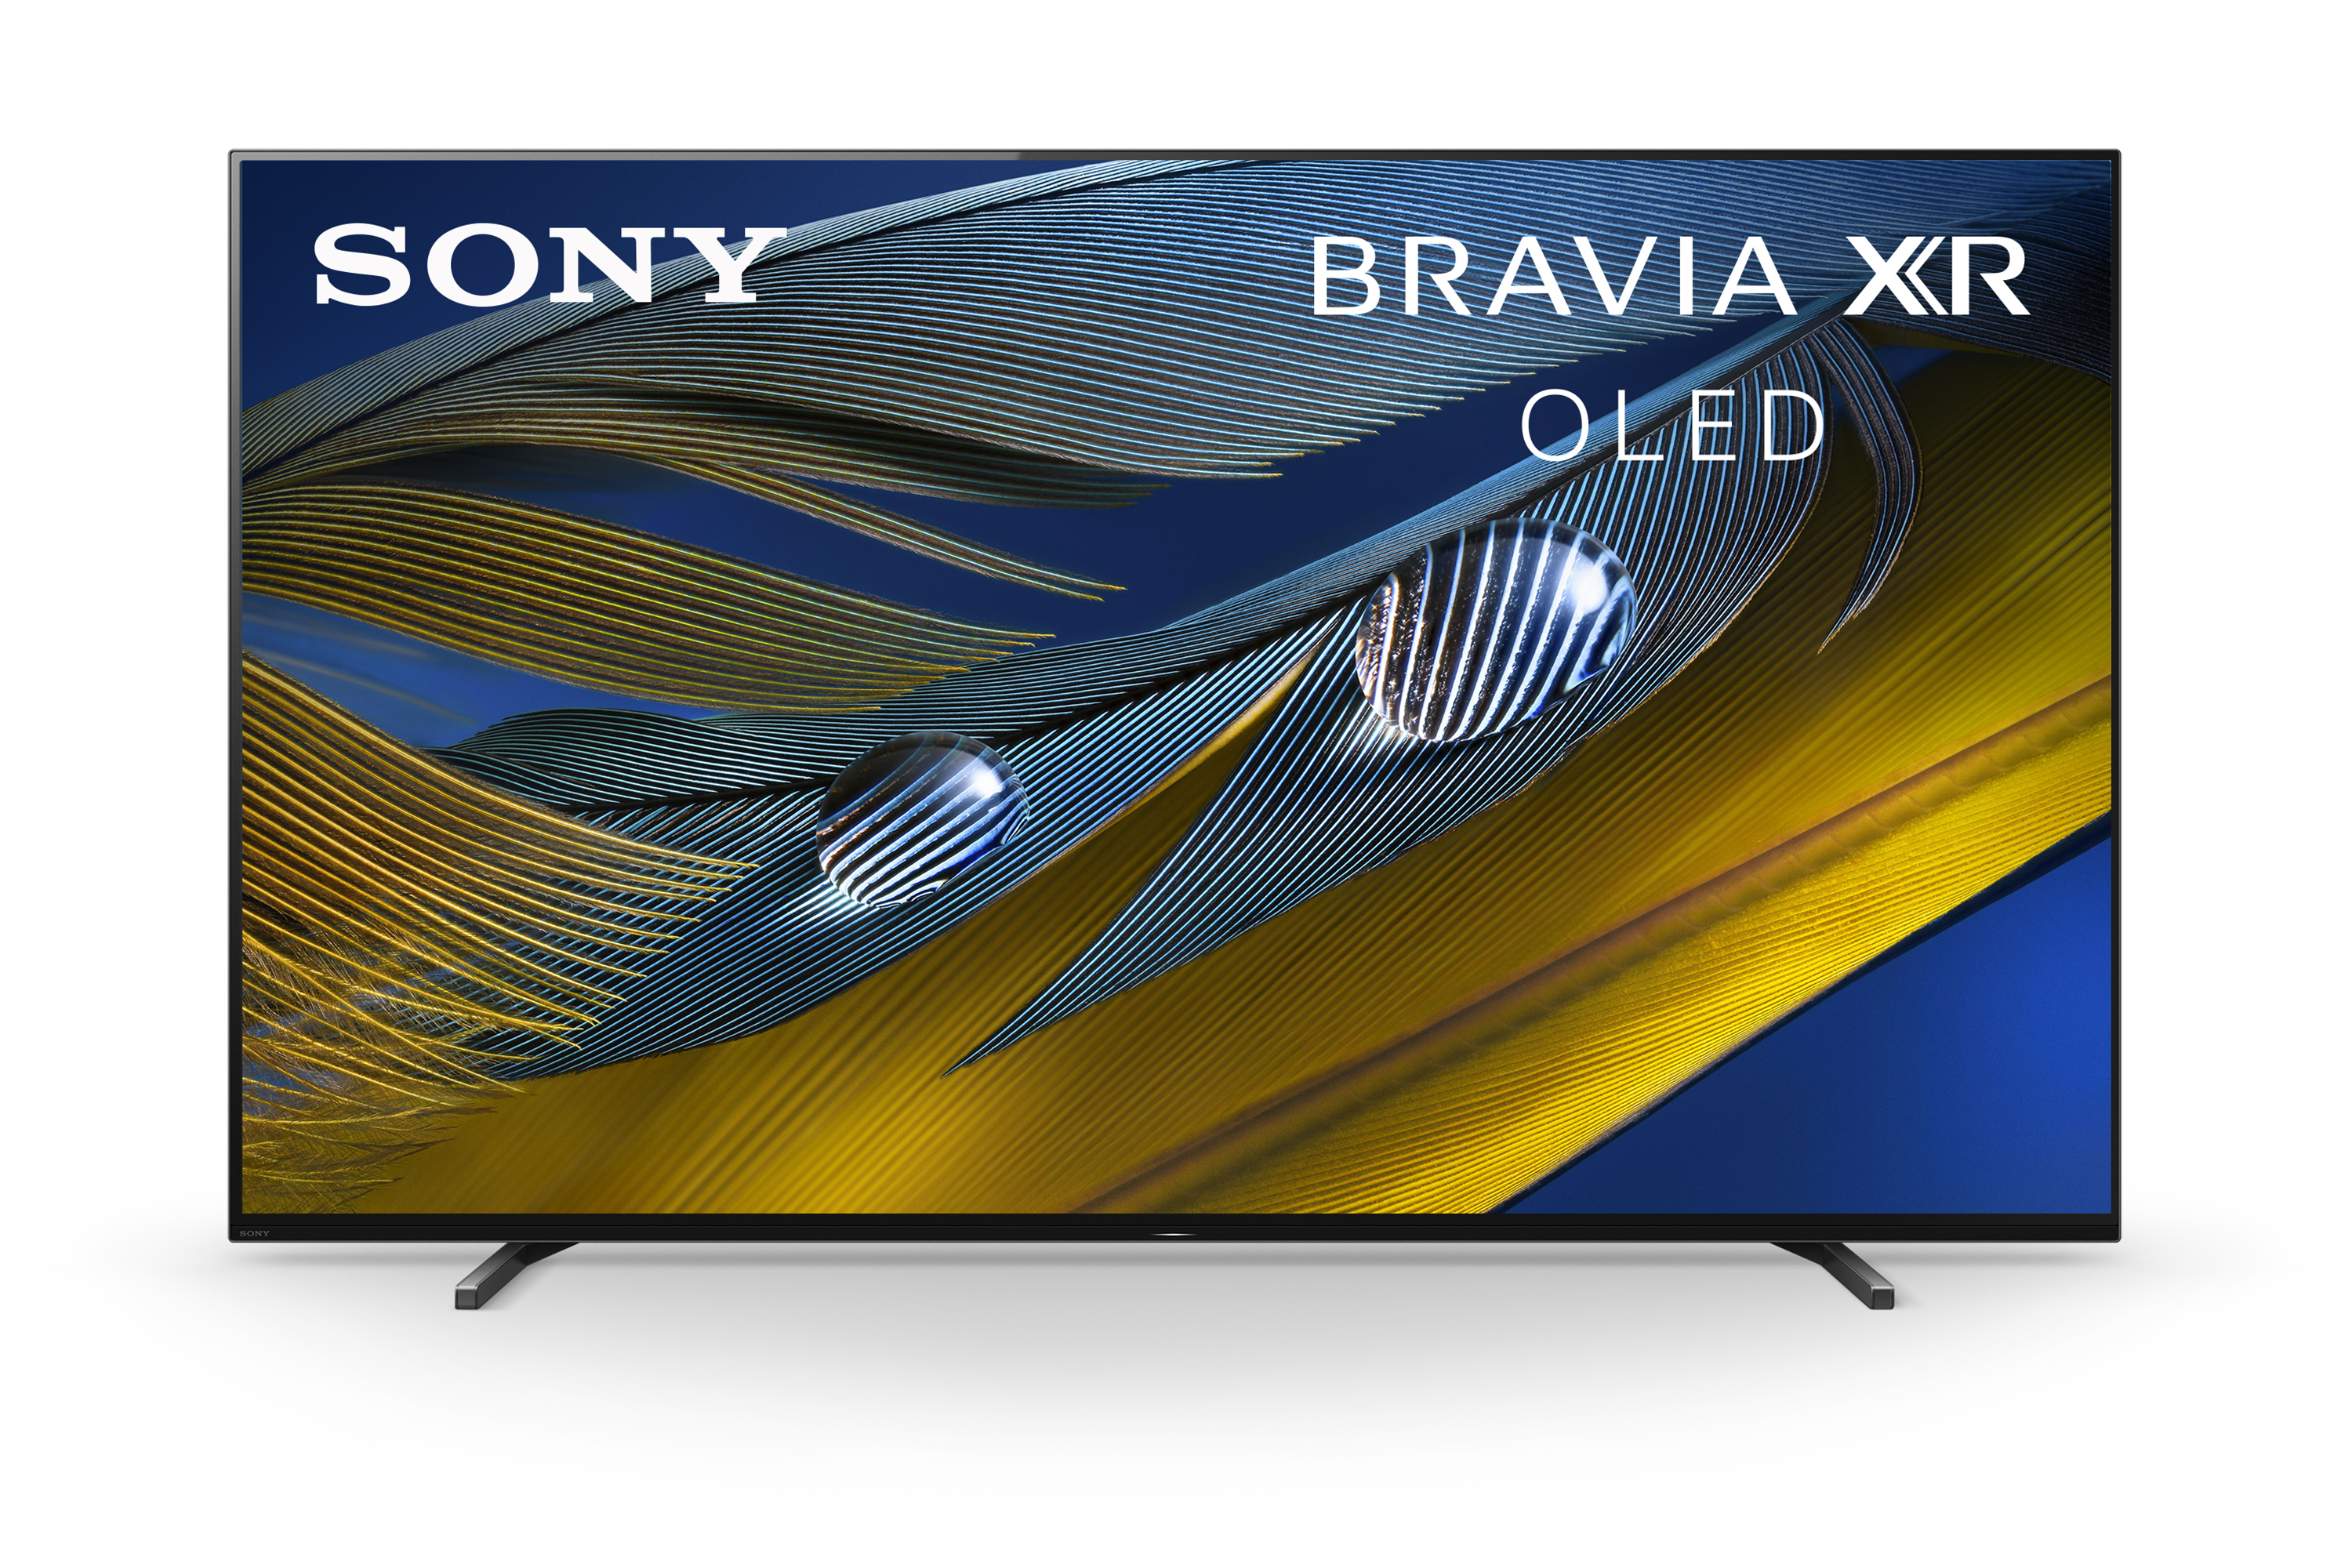 Sony XR A8H Series 4K ULTRA HD OLED TV with XRCognitive Intelligence Proccessing